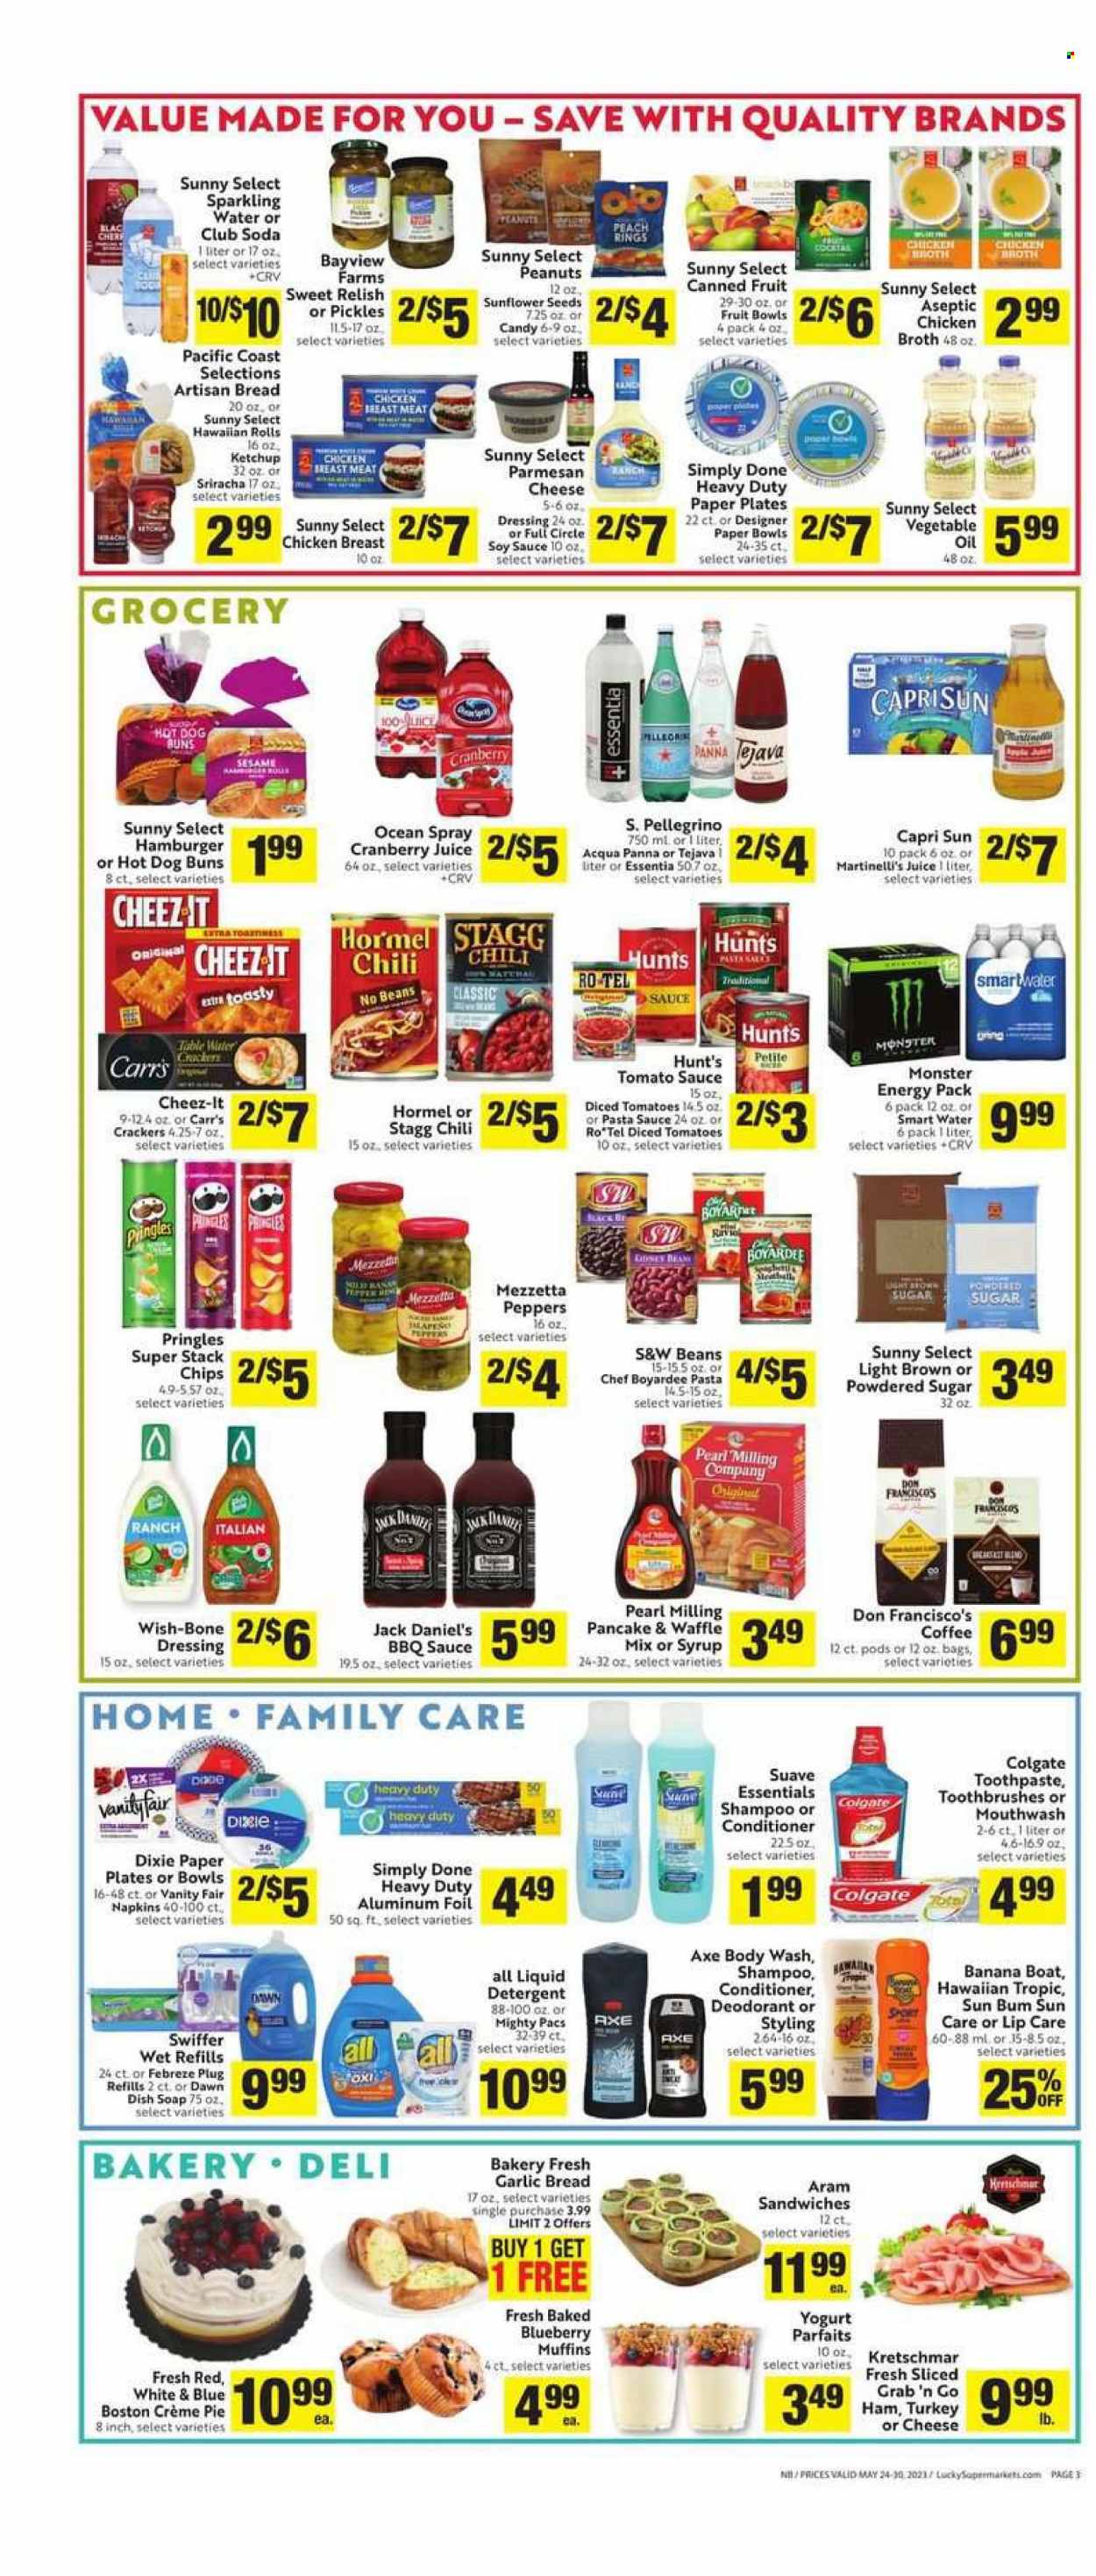 thumbnail - Lucky California Flyer - 05/24/2023 - 05/30/2023 - Sales products - bread, pie, buns, hawaiian rolls, muffin, peppers, fruit cup, Jack Daniel's, pasta sauce, sauce, pancakes, Hormel, ham, parmesan, yoghurt, crackers, Candy, Pringles, chips, Cheez-It, salty snack, cane sugar, chicken broth, icing sugar, broth, tomato sauce, pickles, Chef Boyardee, canned fruit, diced tomatoes, BBQ sauce, soy sauce, sriracha, ketchup, dressing, syrup, peanuts, sunflower seeds, Capri Sun, cranberry juice, juice, Monster, Monster Energy, Club Soda, sparkling water, Smartwater, San Pellegrino, water, coffee, chicken breasts, chicken, turkey. Page 3.